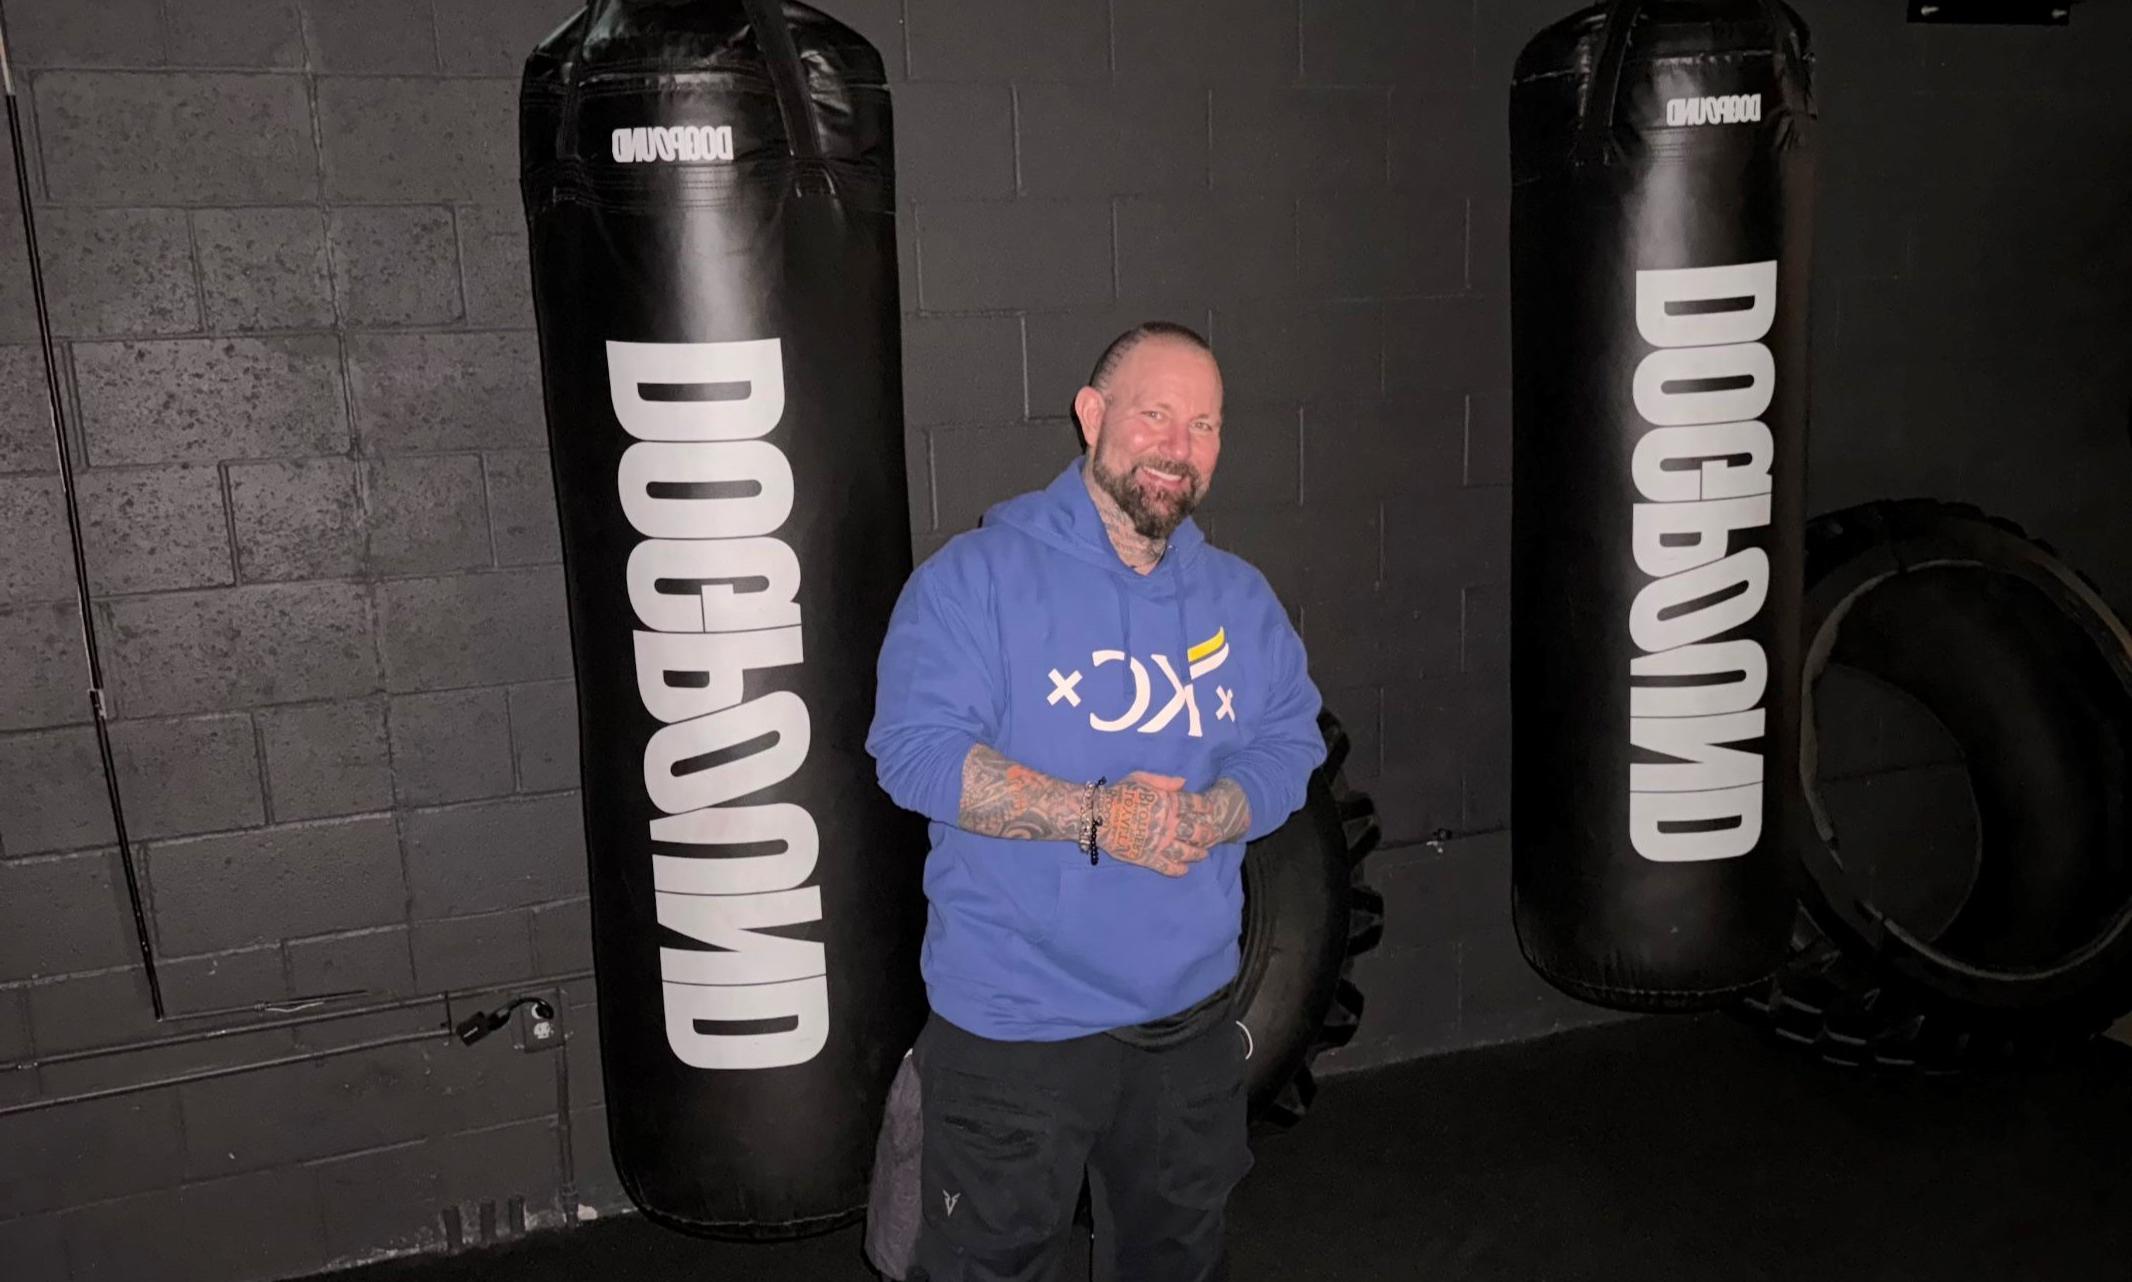 Taylor Swift and other celebrities' fitness trainer UMKC Alum Kirk Myers wearing a blue KC Mobb Made Sweatshirt in front of boxing sandbags at his gym dogpound